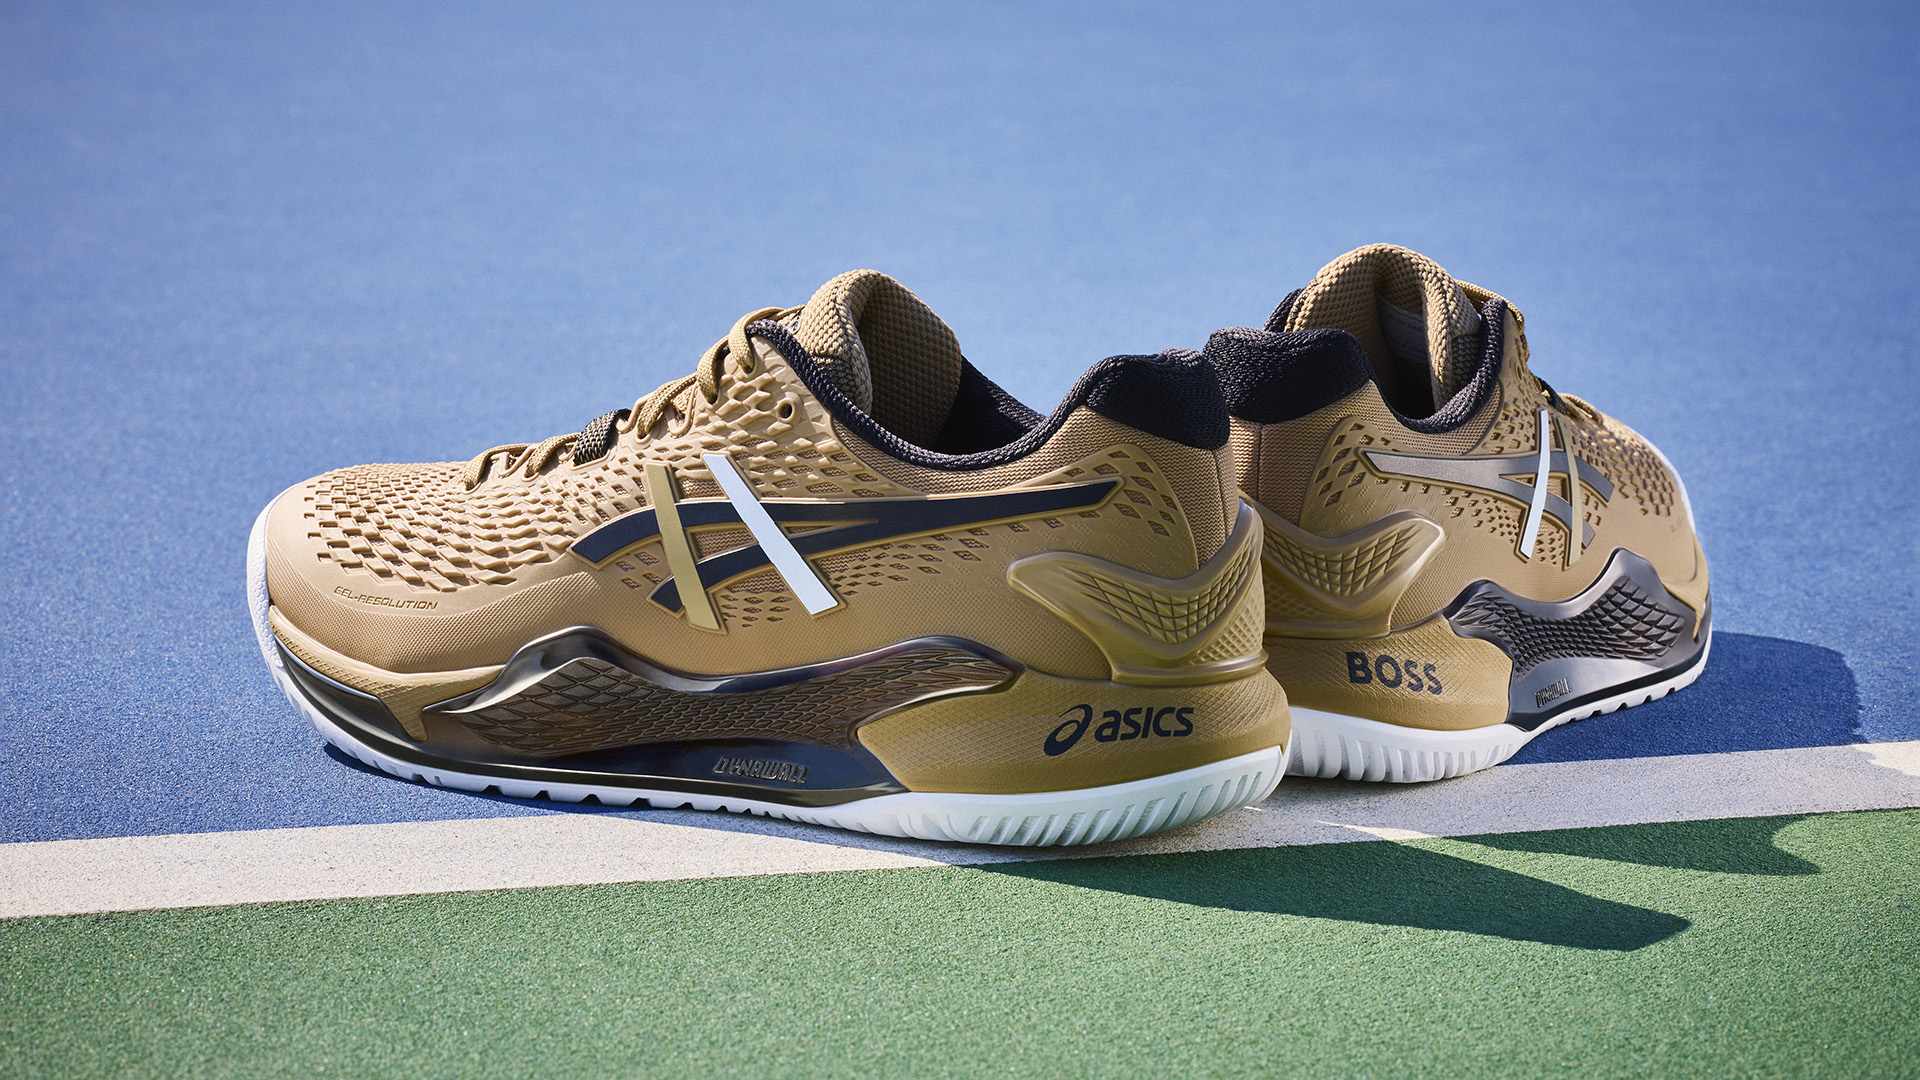 ASICS teams up with BOSS to launch limited edition Gel-Resolution